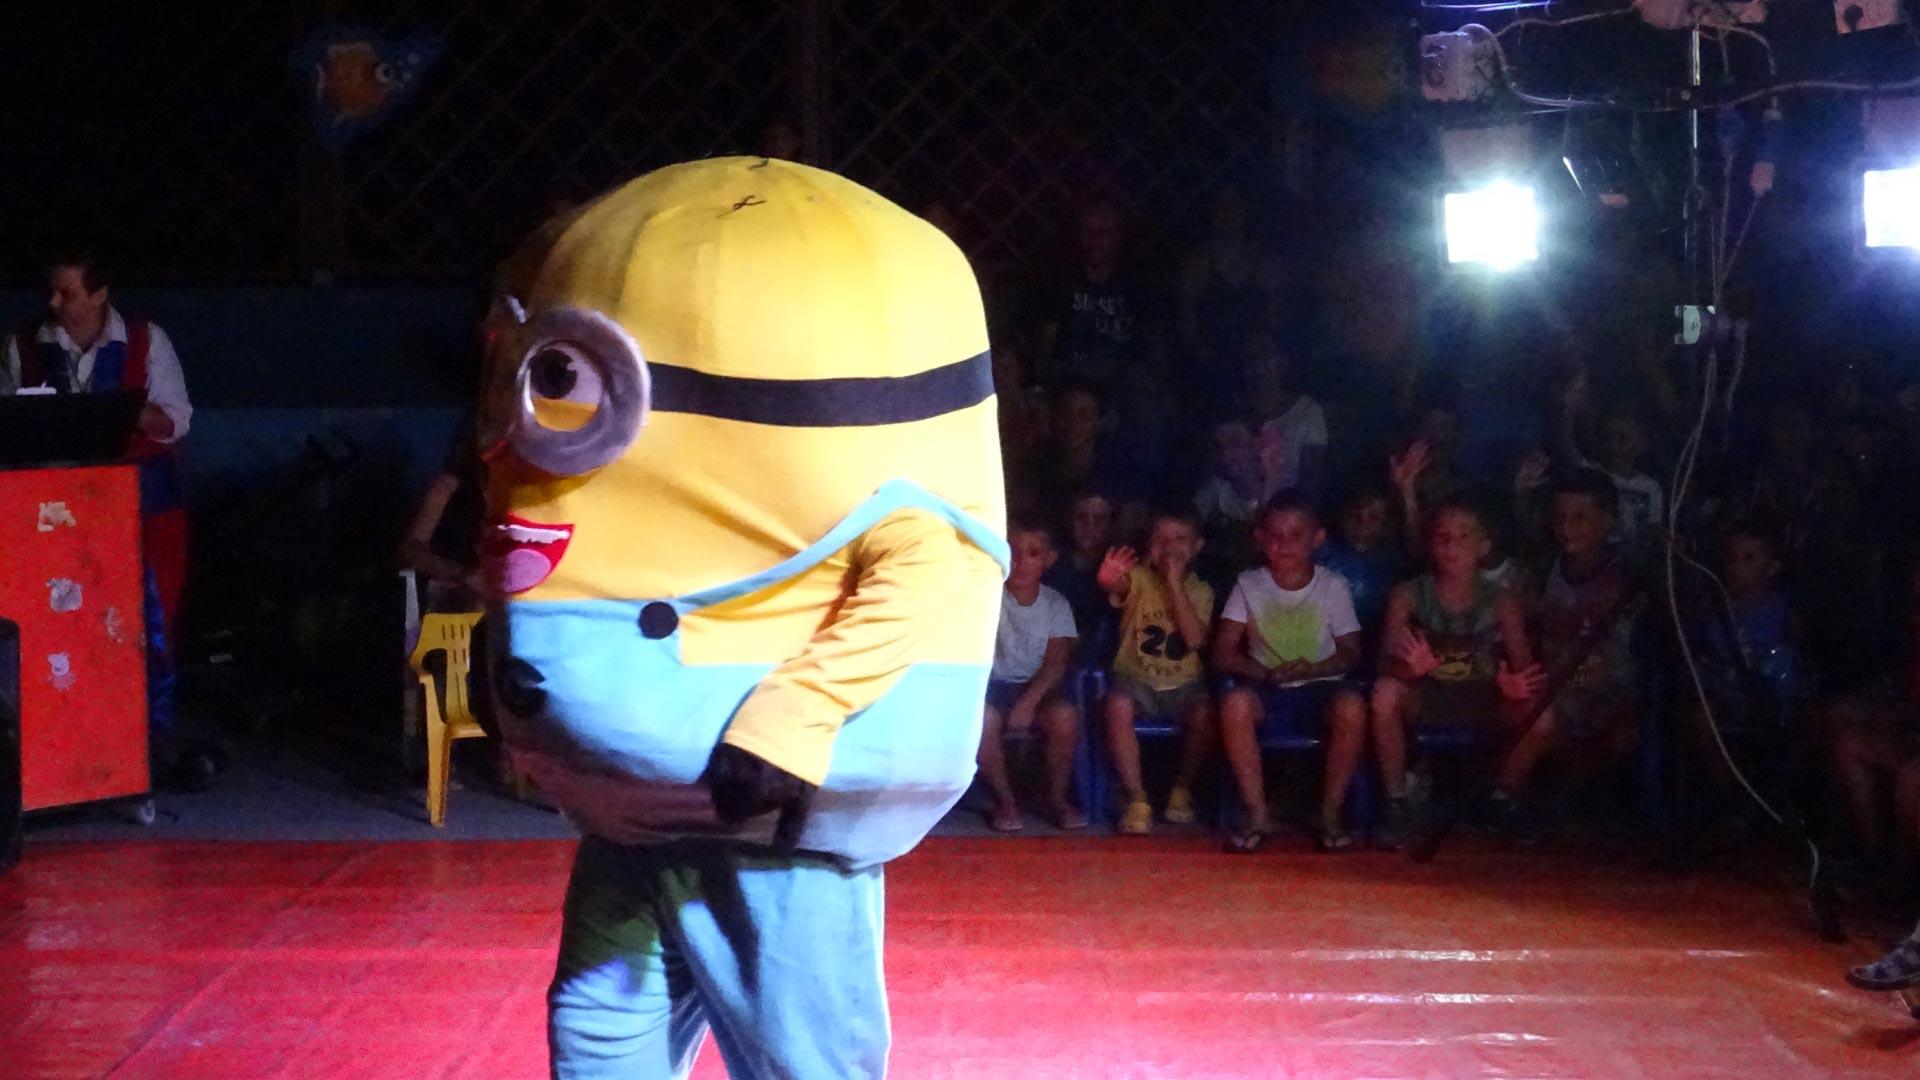 Person in Minion costume performs in front of children at an event.